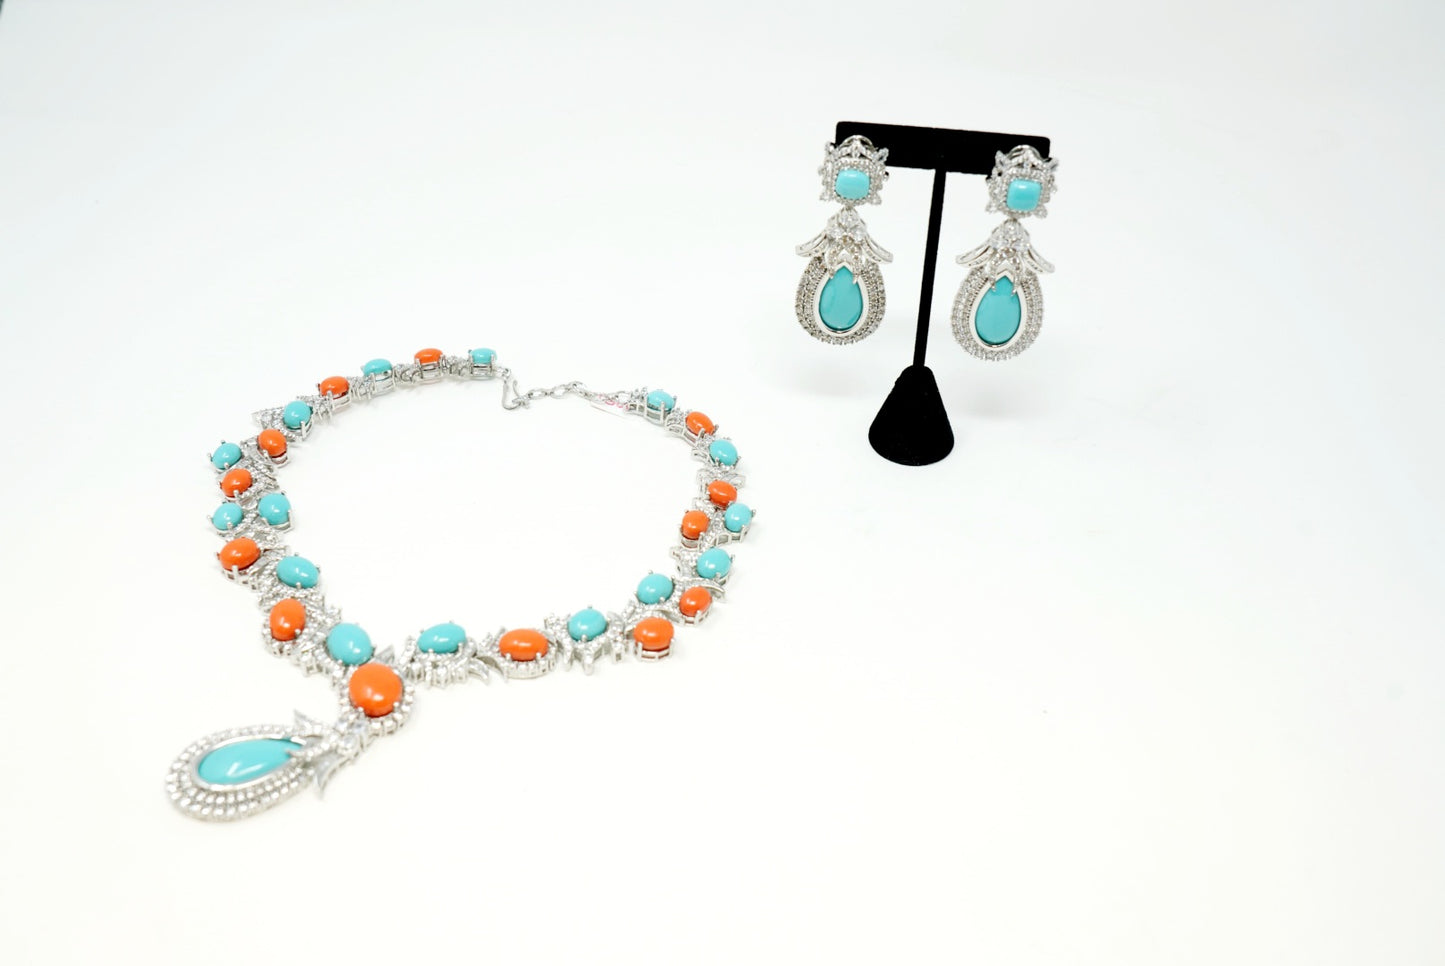 Orange Turquoise Color Stones Necklace Set in Silver